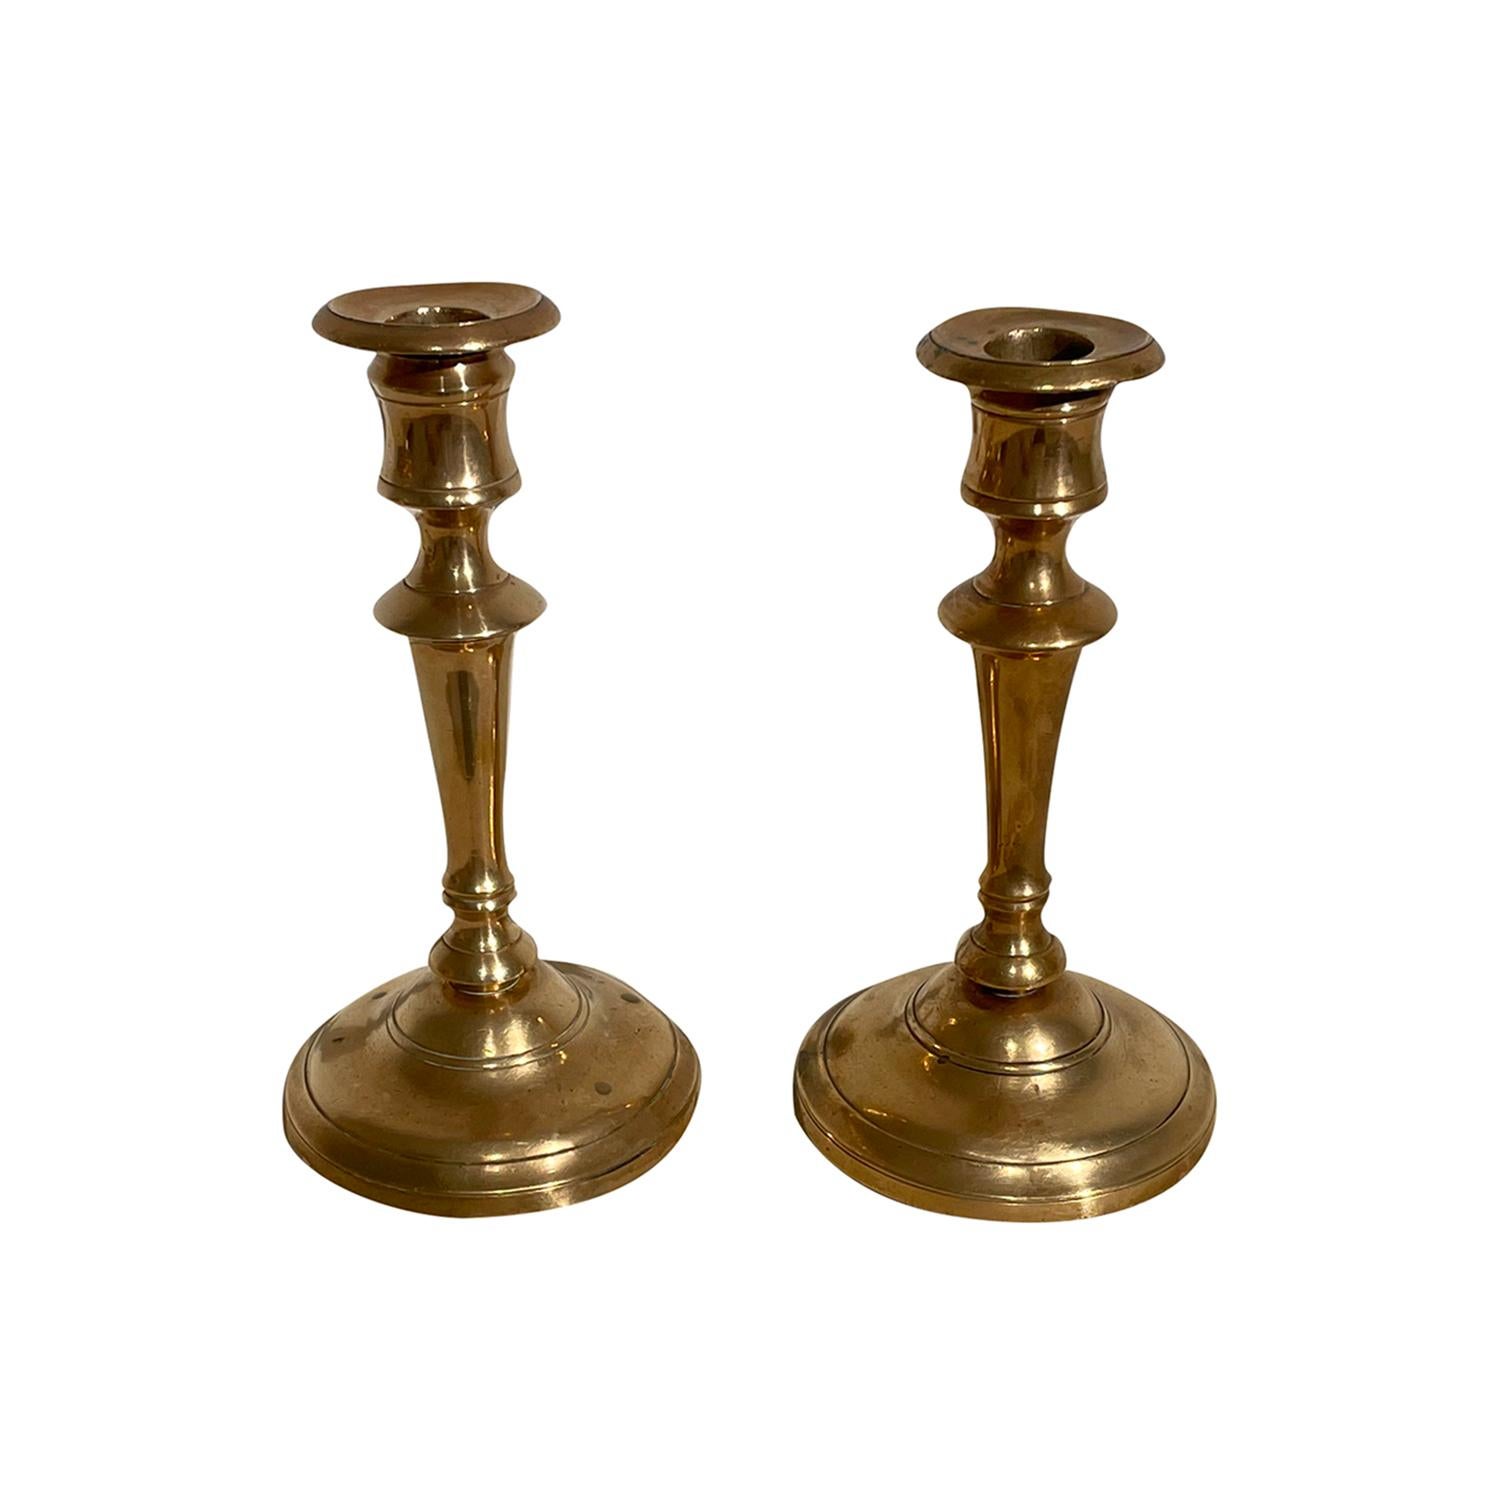 A gold, Swedish Gustavian pair of candle holders made of hand crafted bronze, designed and produced by Skultuna in good condition. The Scandinavian candlesticks, stands are enhanced by derail craft art. Signed SB at the bottom. Model Nr. 15. Wear